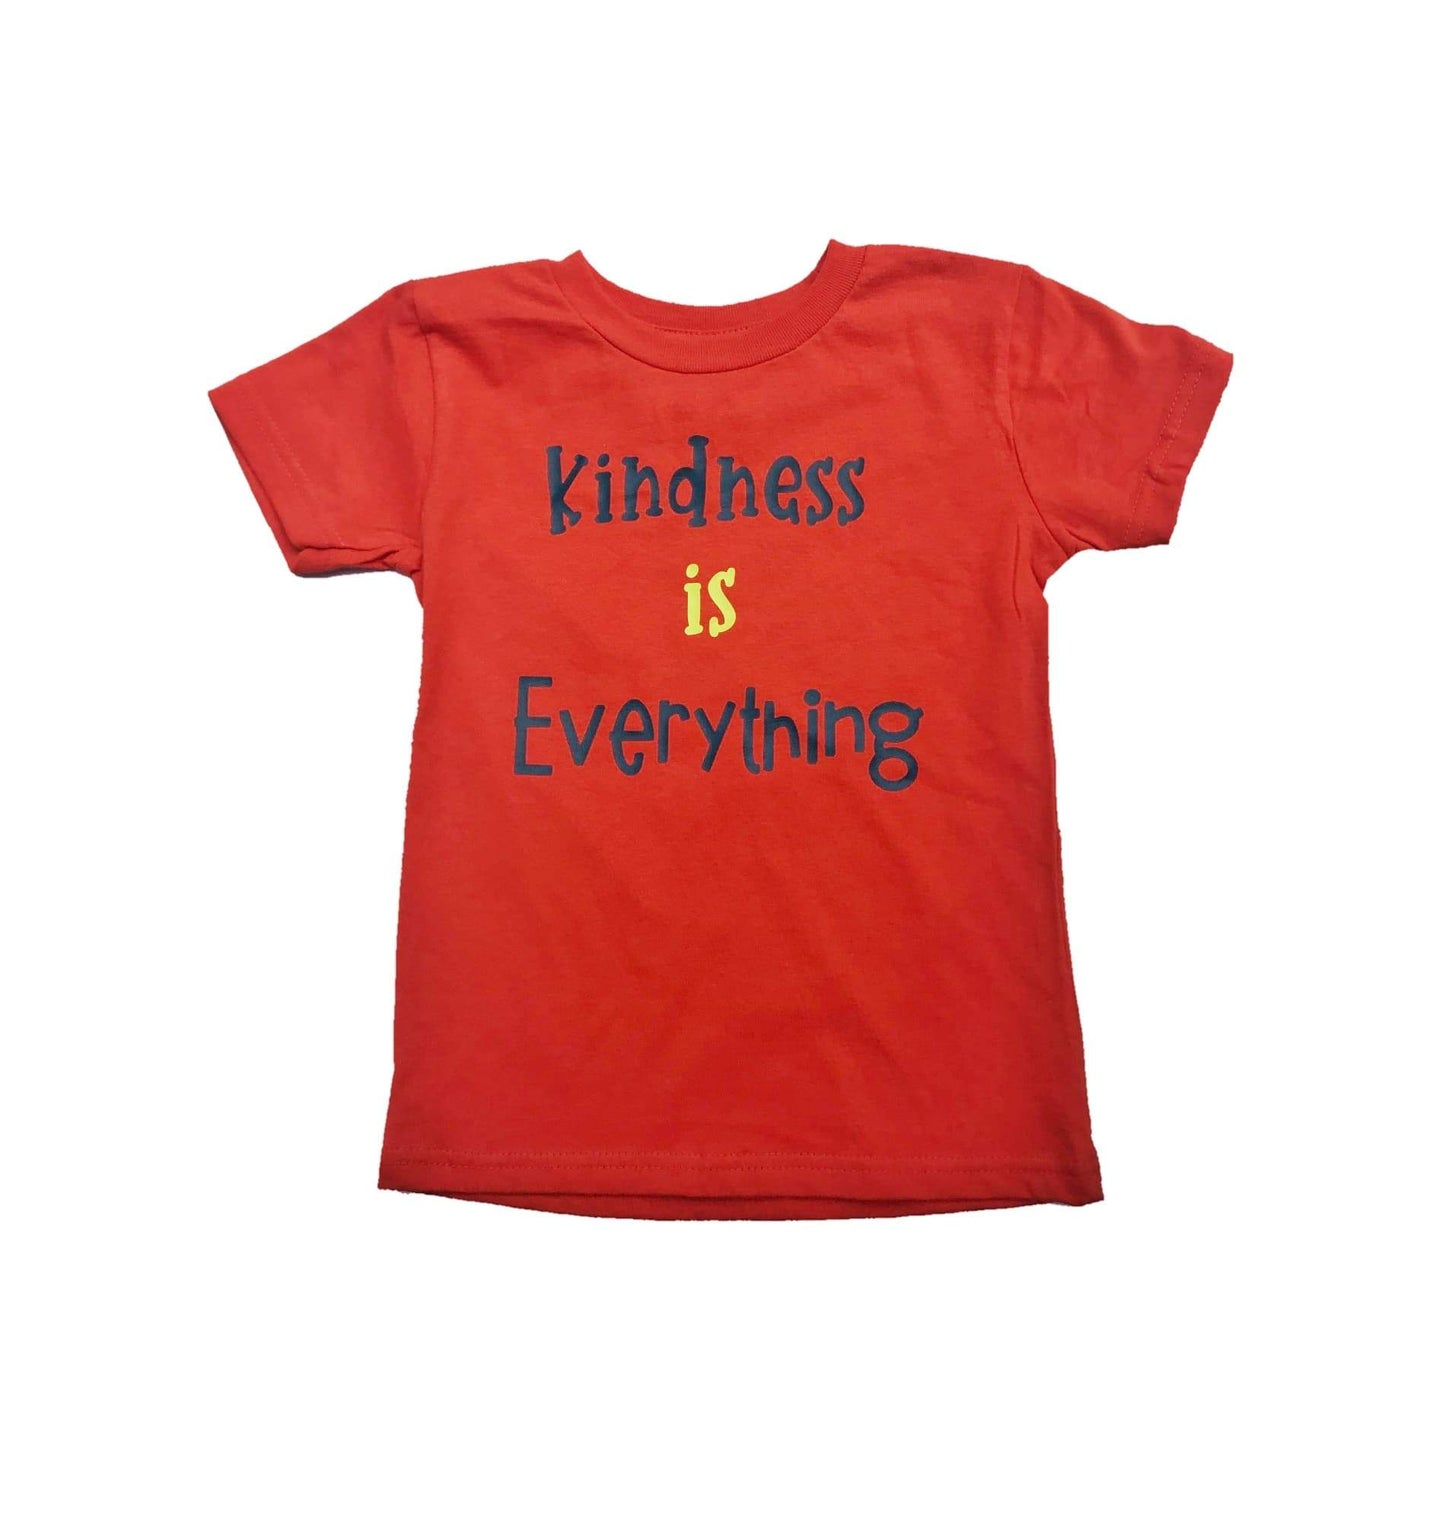 Kindness is Everything-Unity Day Tee